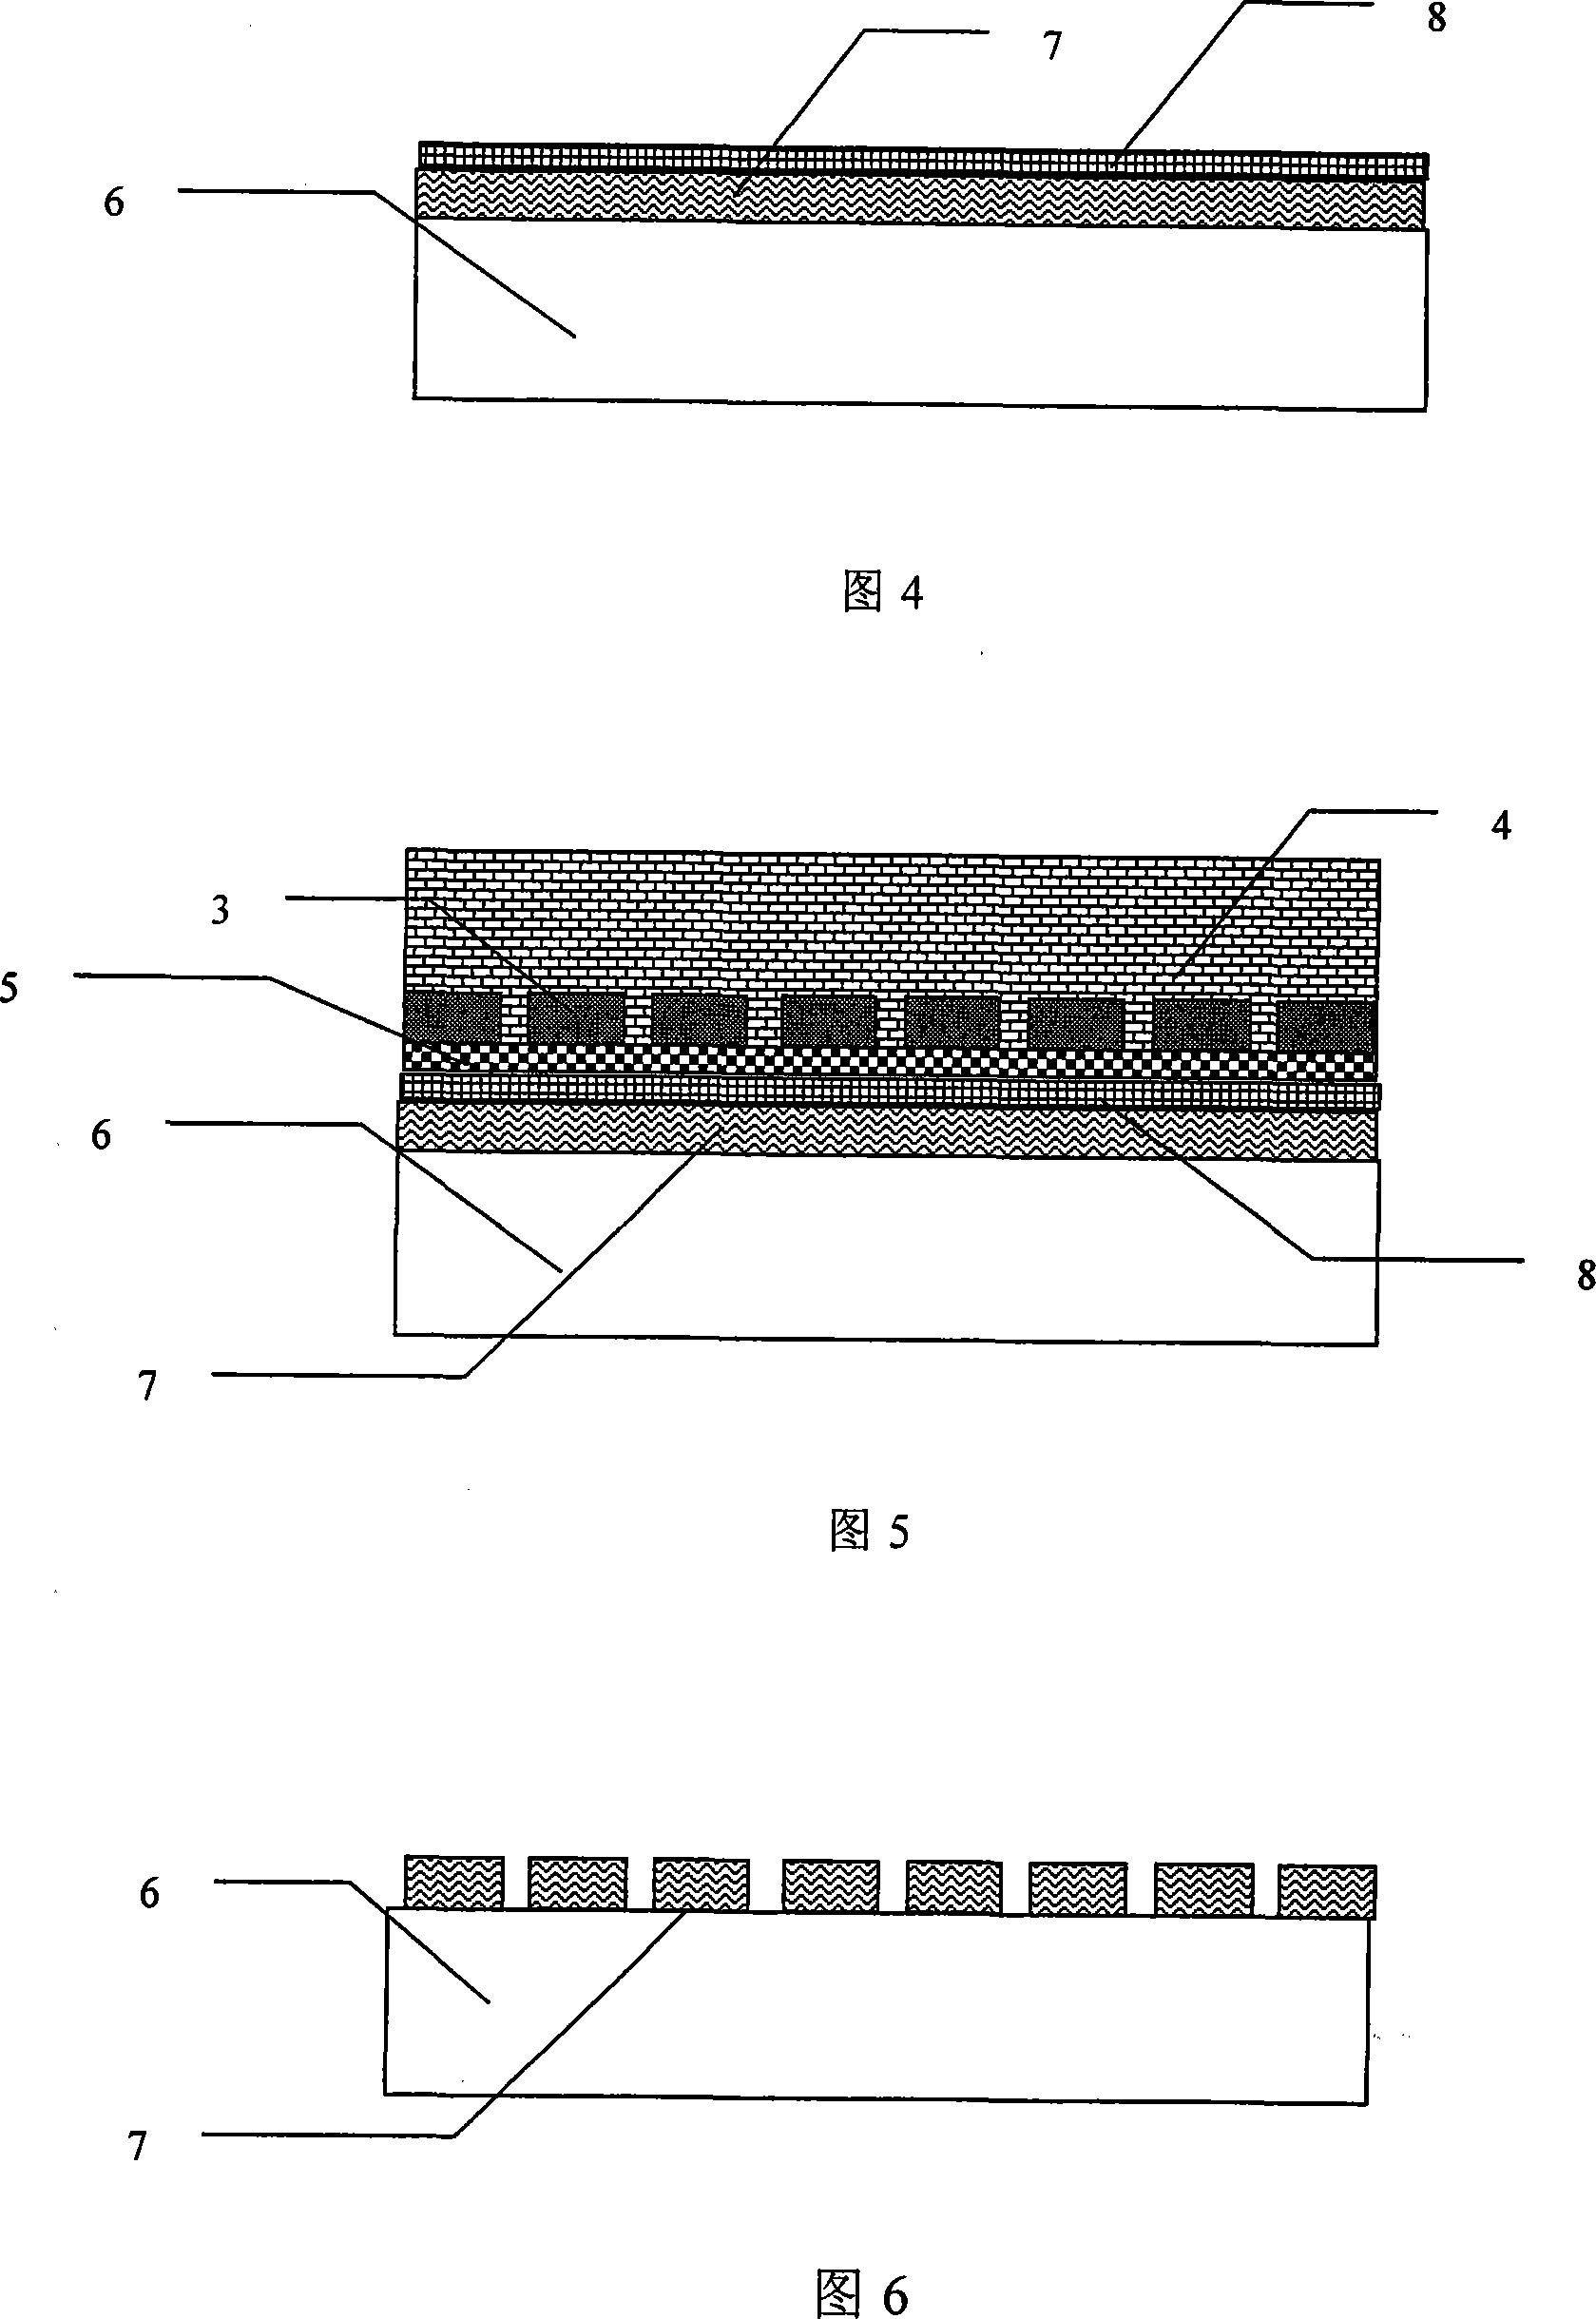 Super resolution lithography method based on PDMS template and silver board material